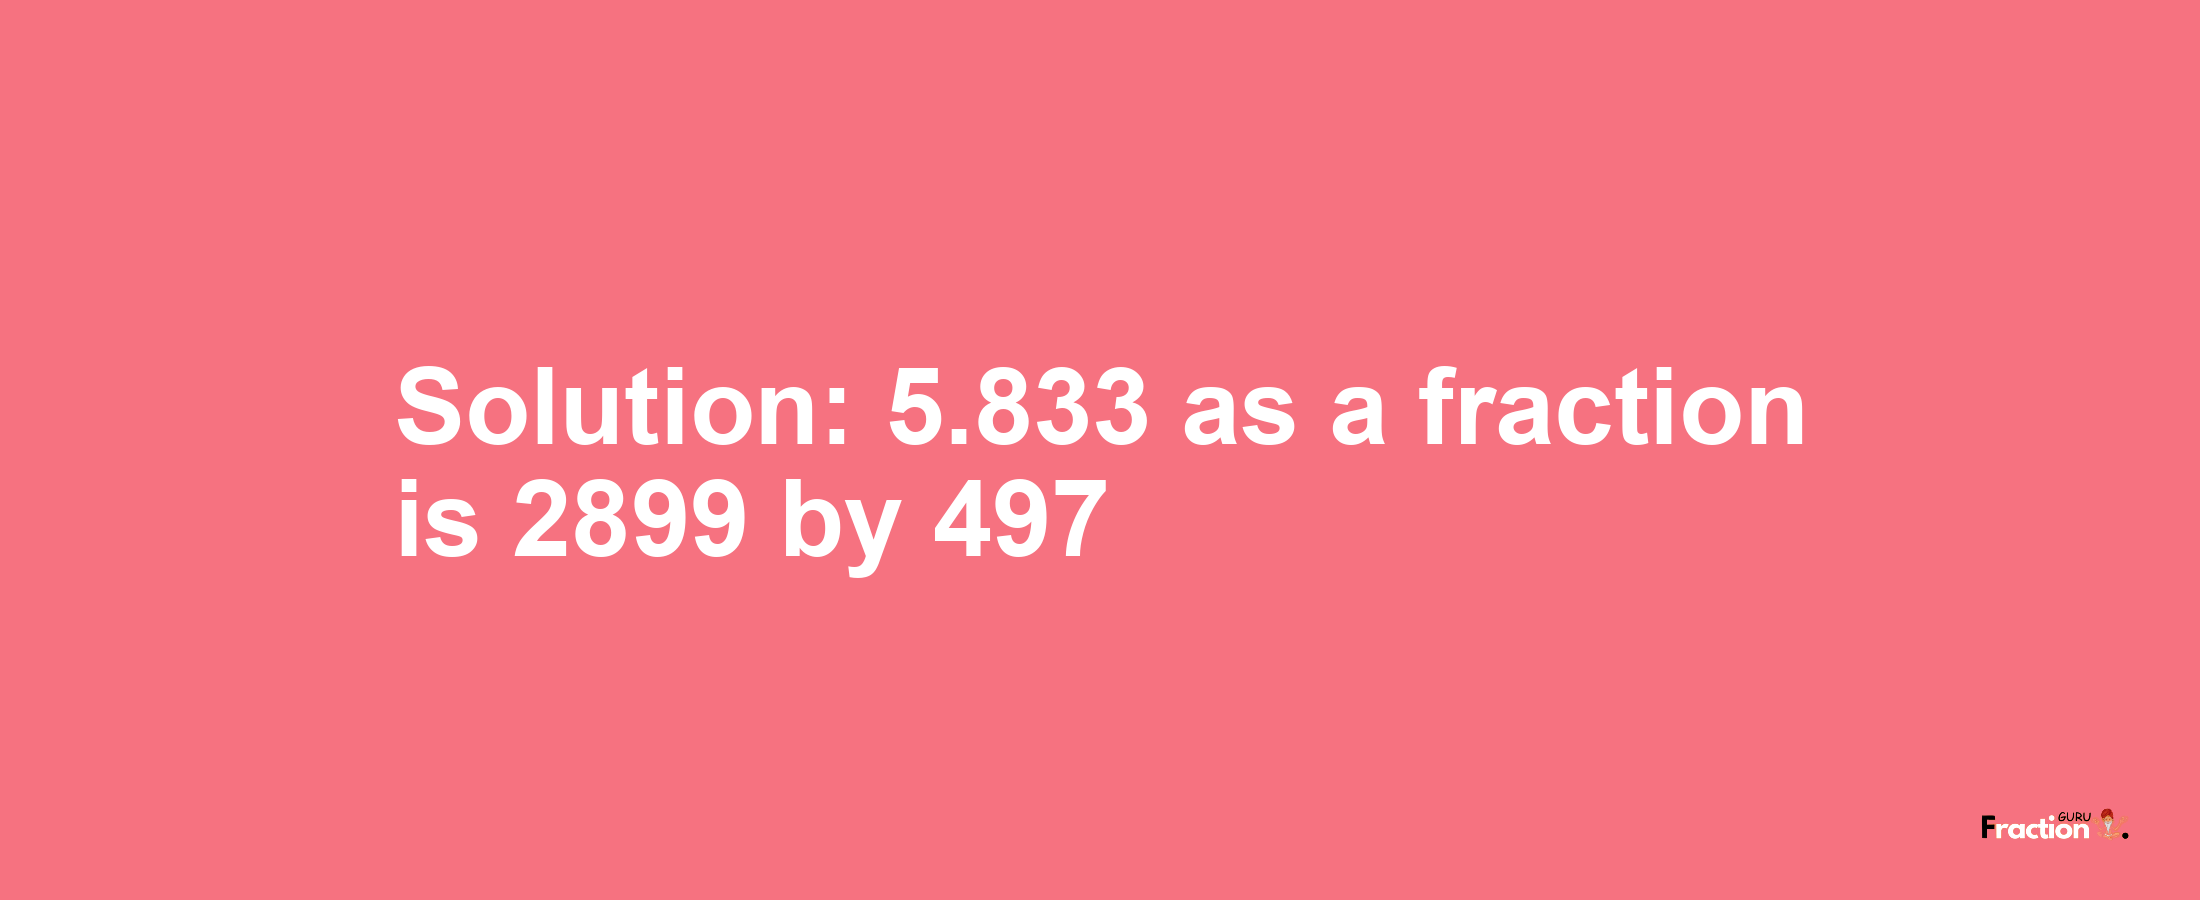 Solution:5.833 as a fraction is 2899/497